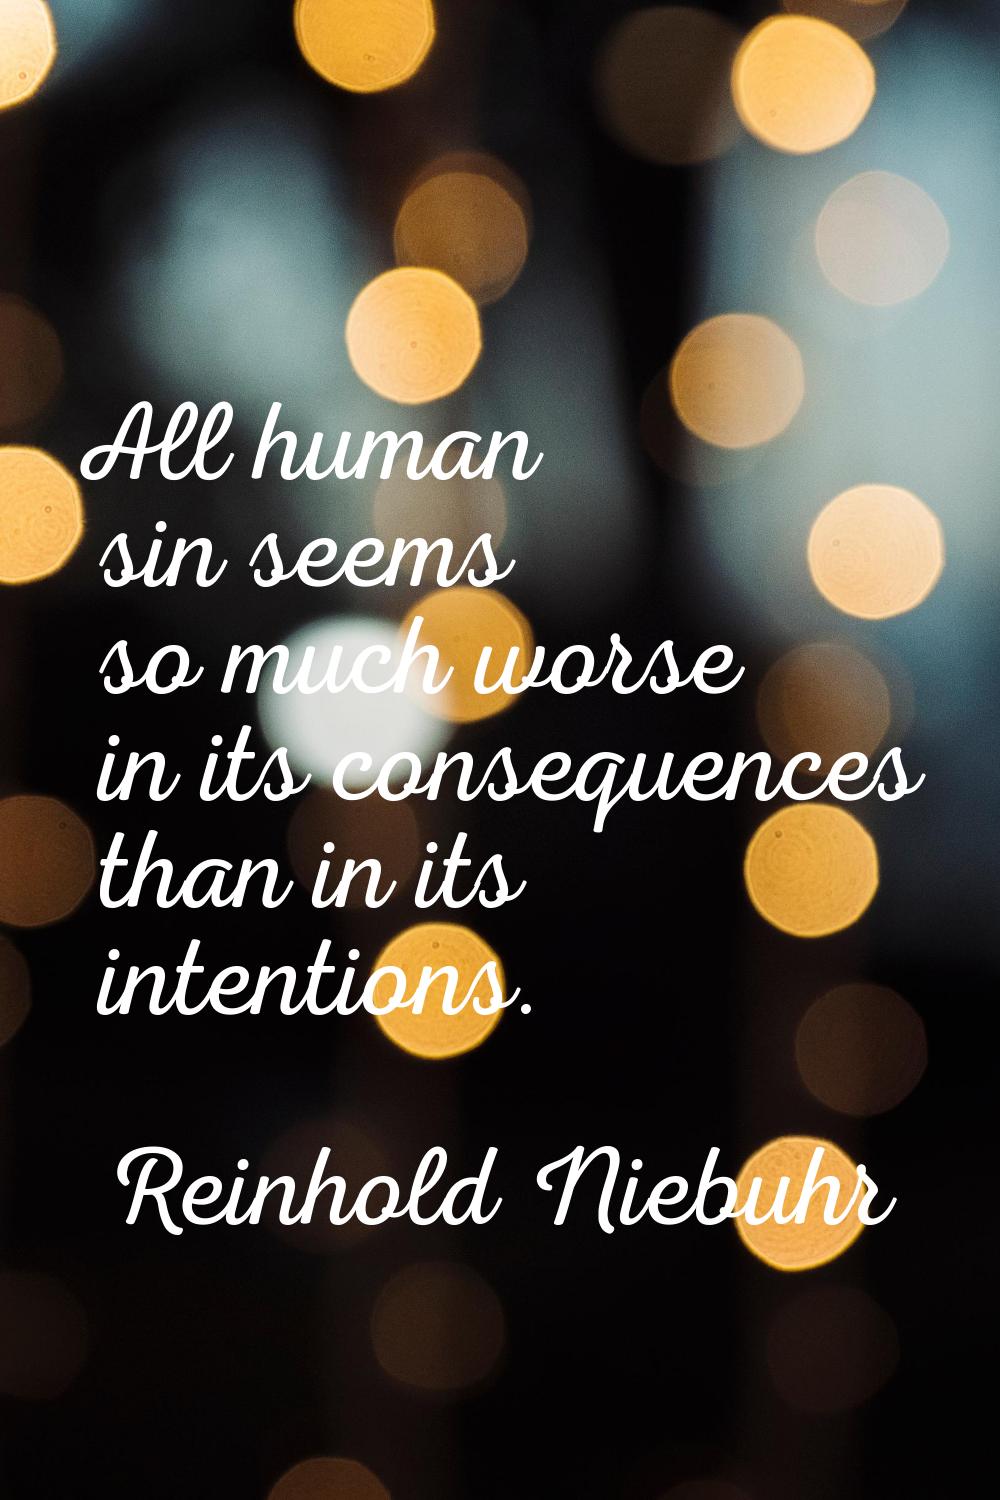 All human sin seems so much worse in its consequences than in its intentions.